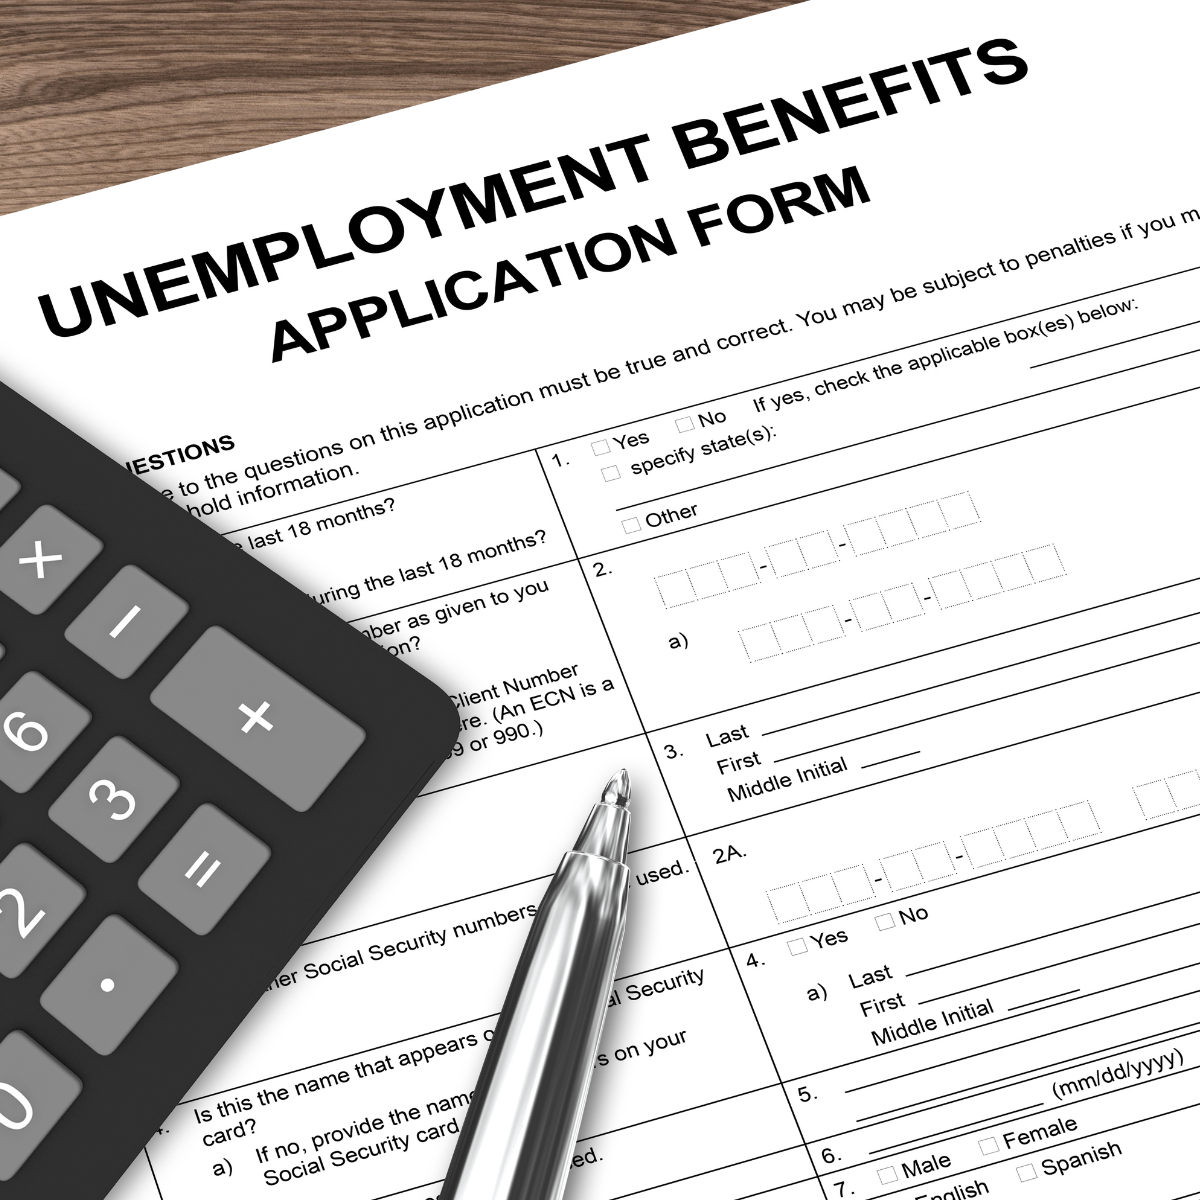 New Notice Requirements for Unemployment Benefits